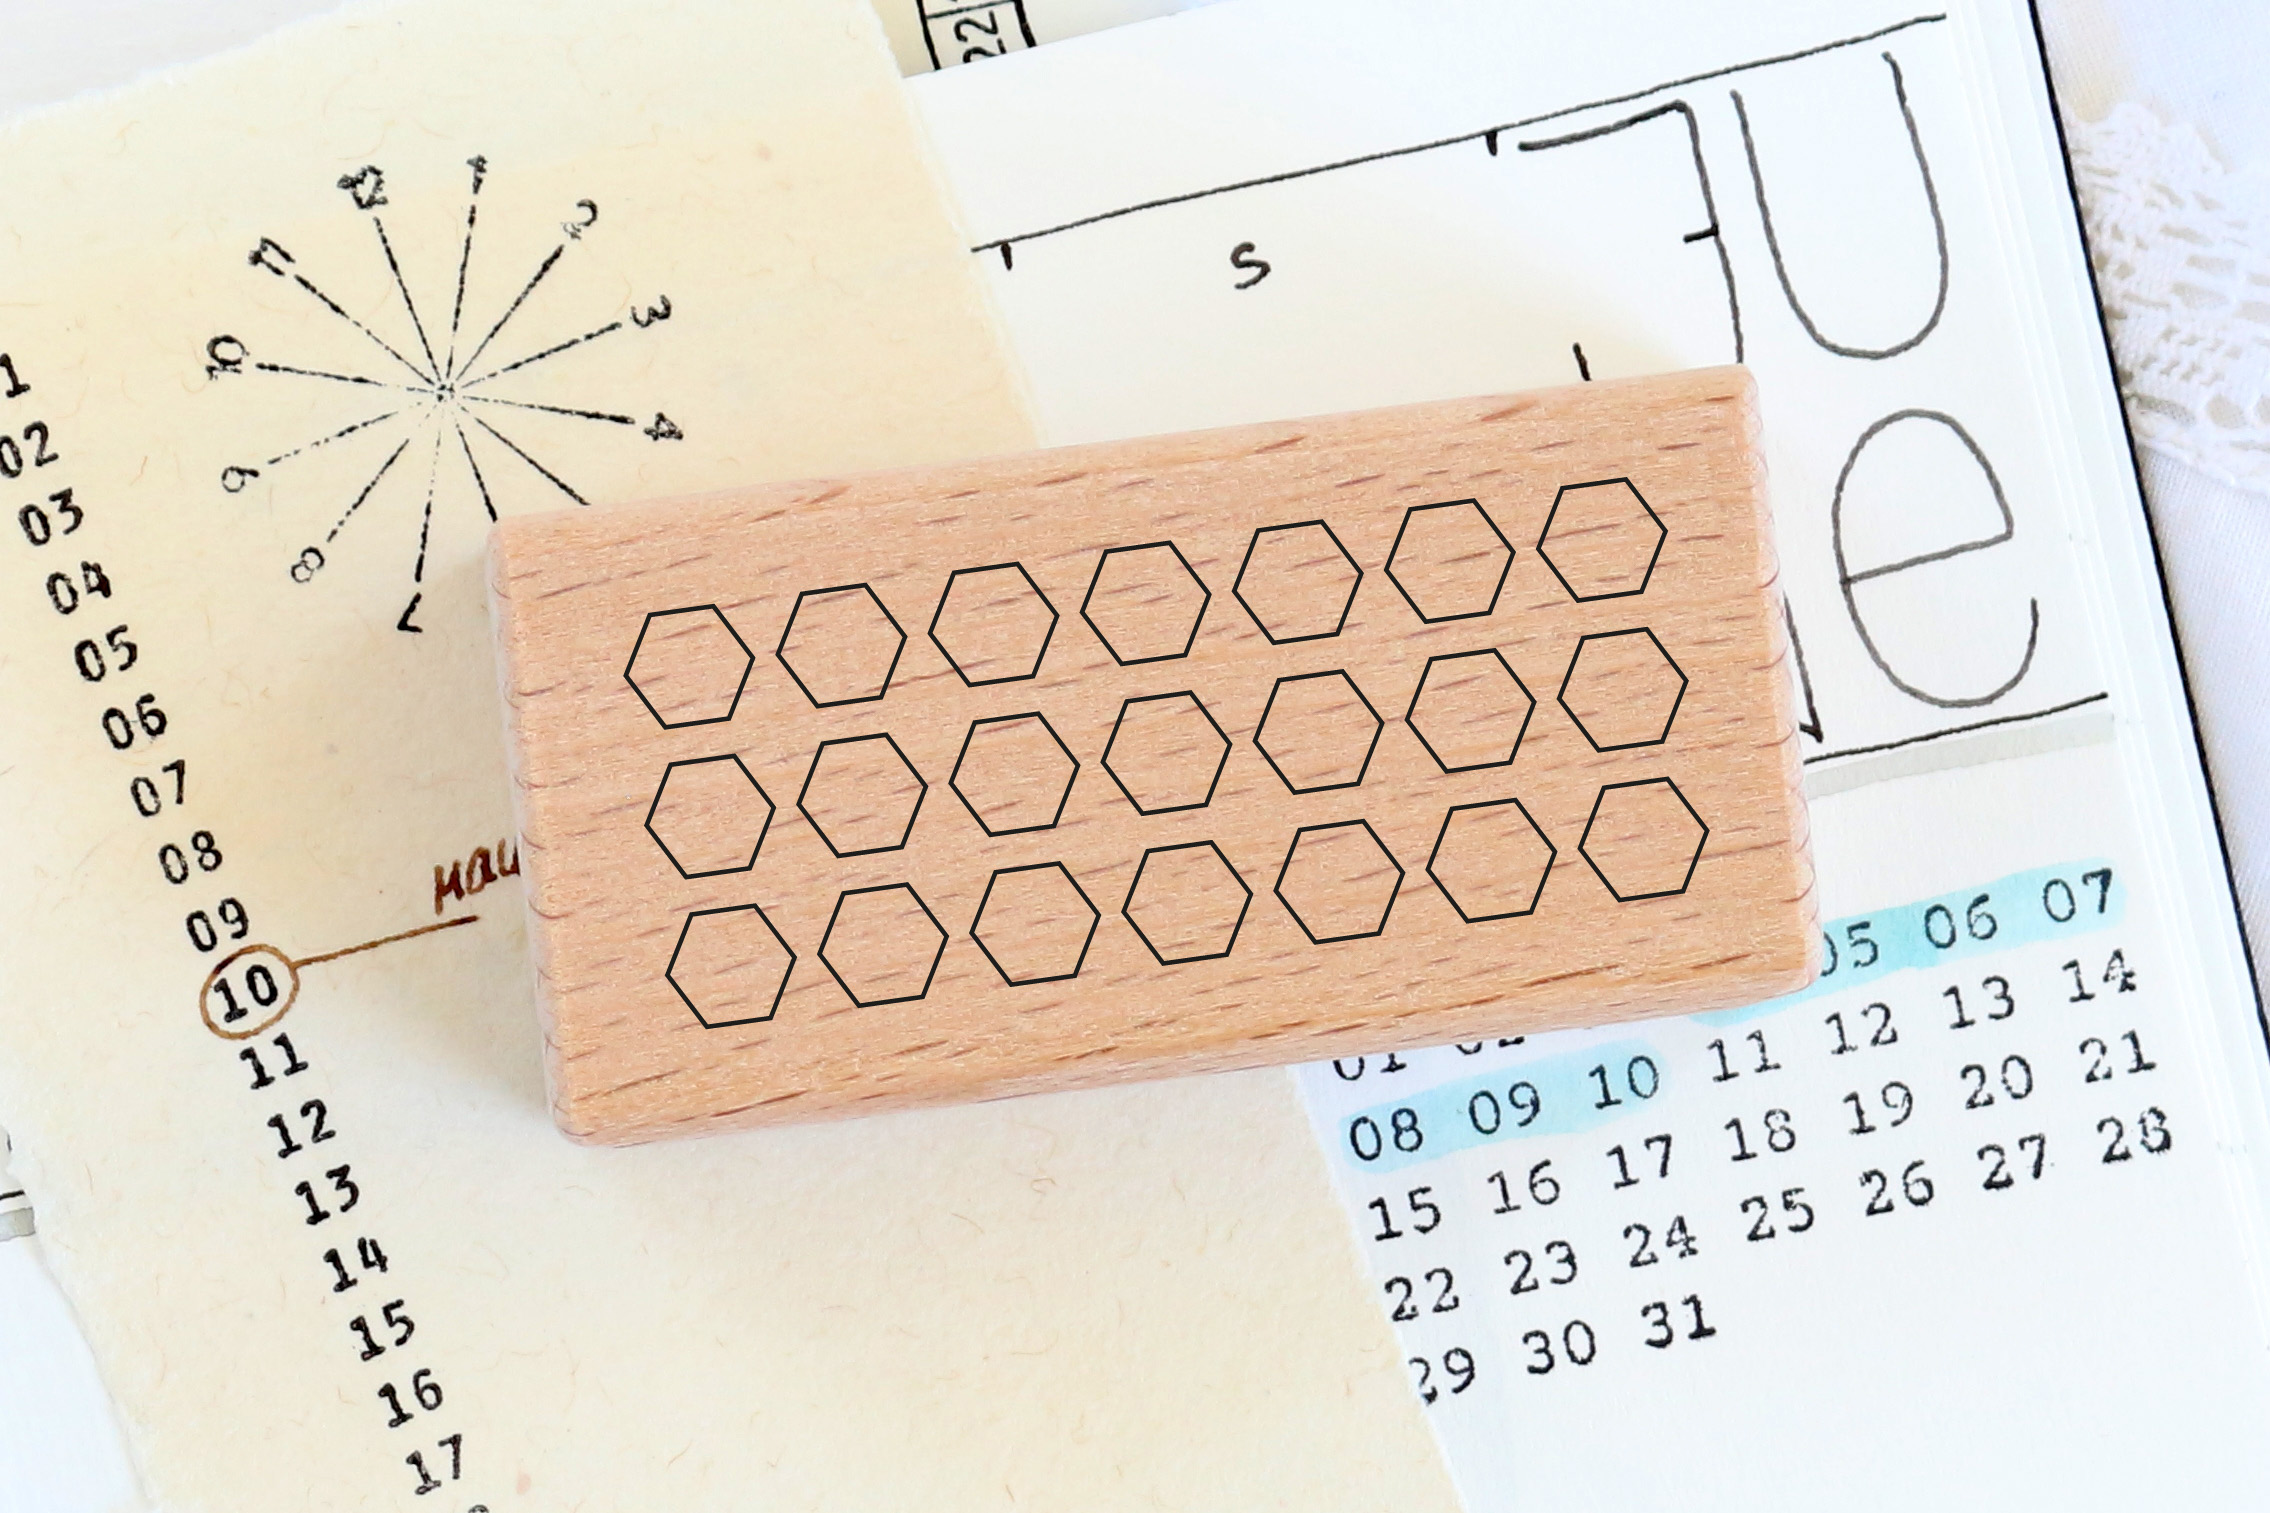 Rubber Stamp Small Hexagon Tracker Perpetual Calendar Perpetual Stamp Immerwahrender Kalender Immerwahrender Stempel Habit Tracker Tracker Stamp Habit Stamp Stamp Rubber Stamp Date Stamp Time Stamp Planner Stamp Monthly Stamp Weekly